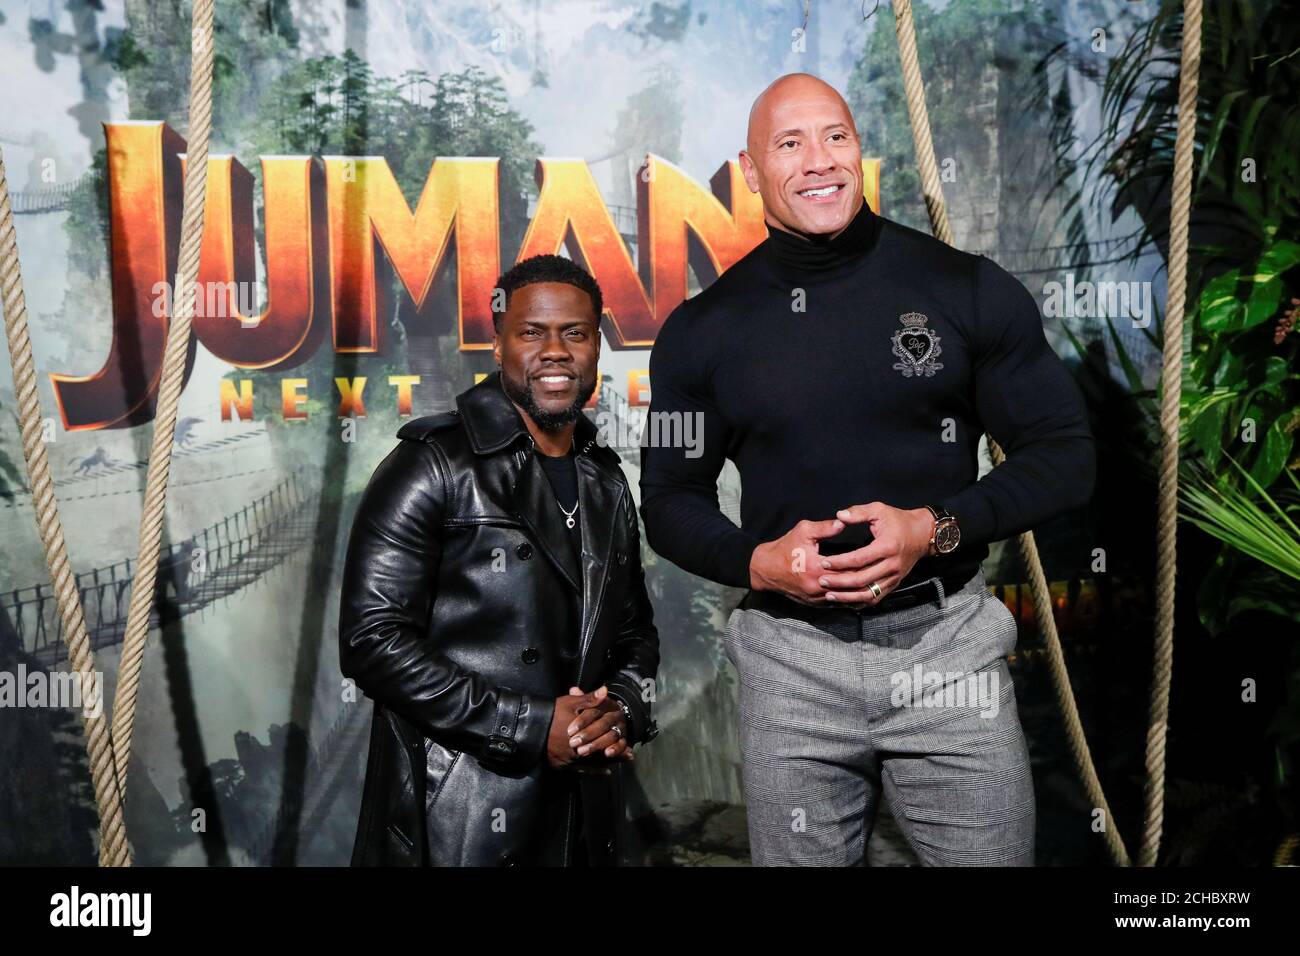 Cast Members Kevin Hart And Dwayne Johnson Attend The Premiere Of The Movie Jumanji The Next Level At The Grand Rex In Paris France December 3 2019 Reuters Benoit Tessier Stock Photo Alamy